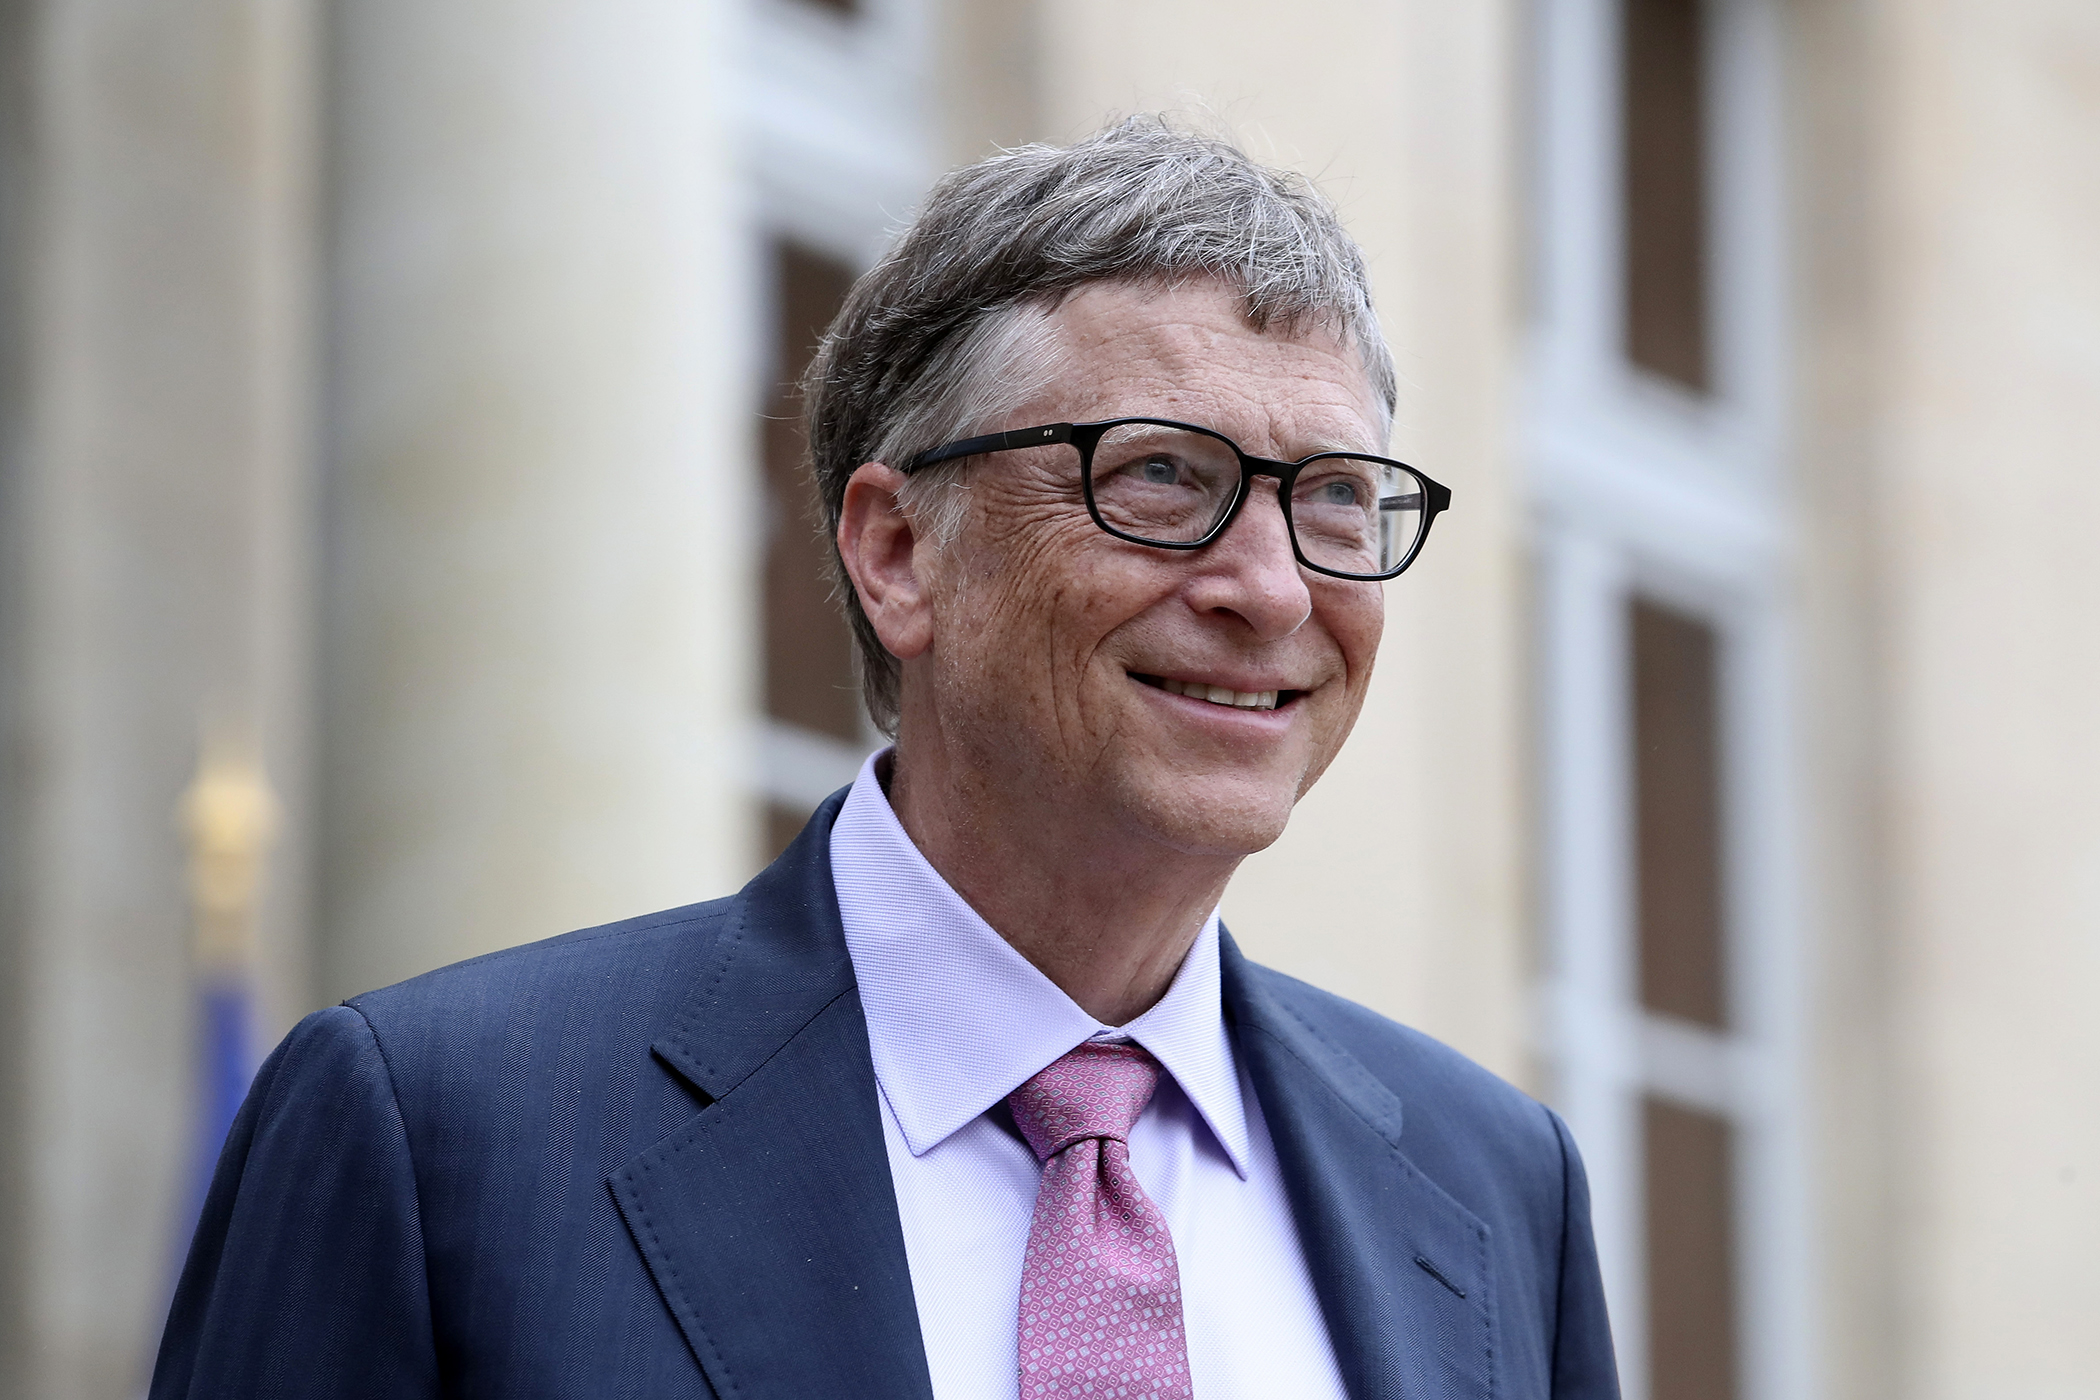 Philanthropist and co-founder of Microsoft, Bill Gates, leaves after a meeting with France's President Francois Hollande at the Elysee Palace in Paris, Monday, June 27, 2016.